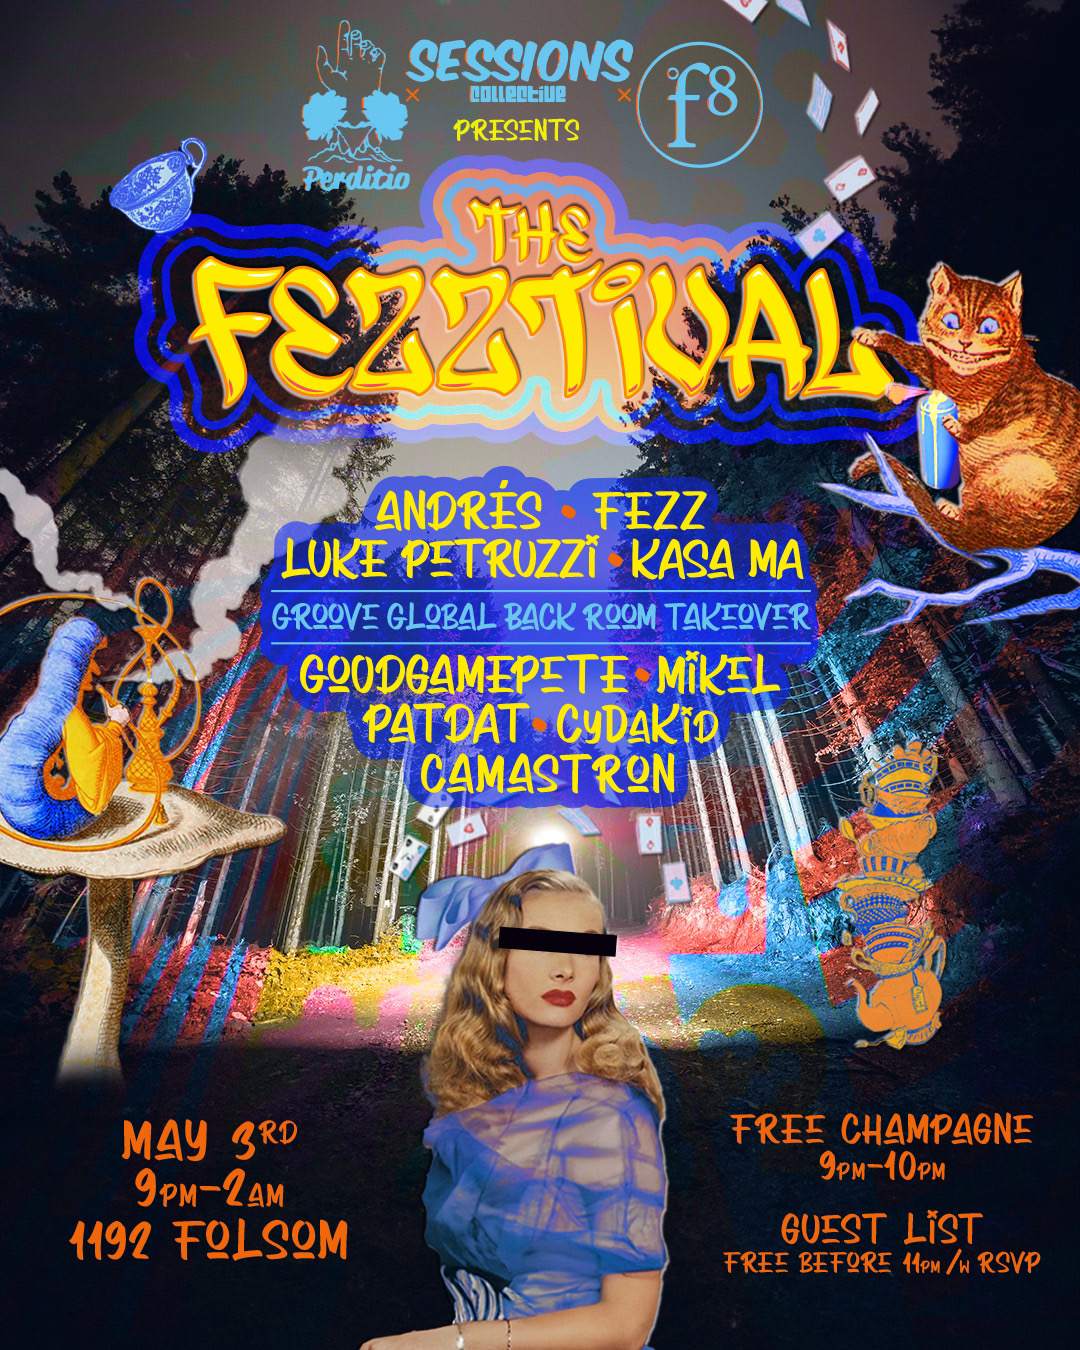 THE FEZZTIVAL presented by Sessions Collective x Perditio x F8 - Página frontal